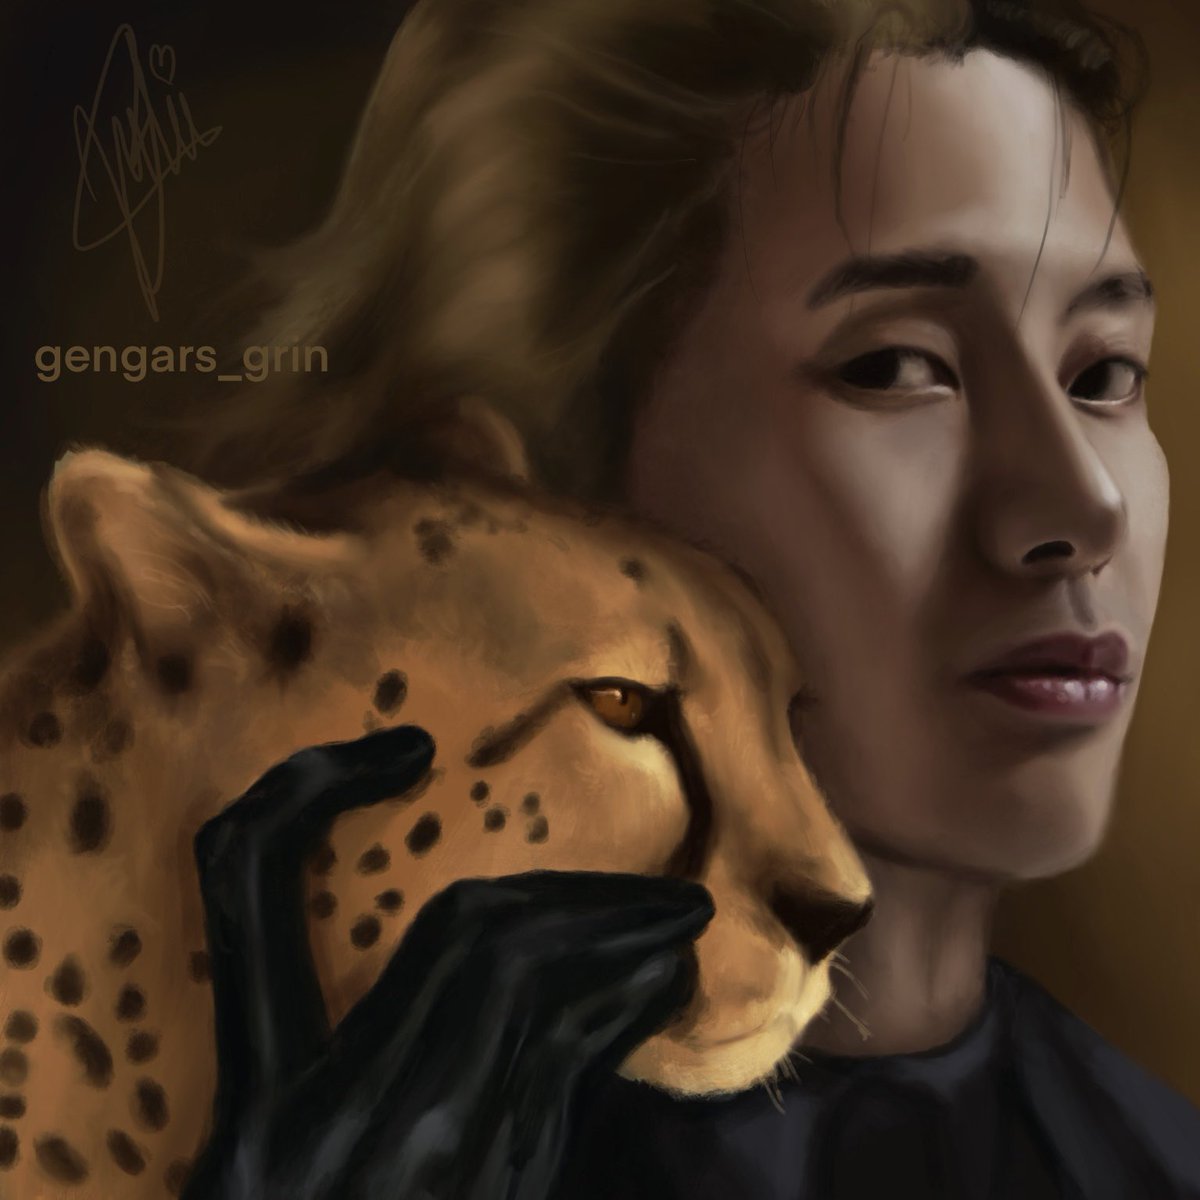 A new art piece 🤍
🐆 can’t get this song out of my mind 
@JacksonWang852 

#JacksonWang #jacksonwangcheetah #fanart #digitalart